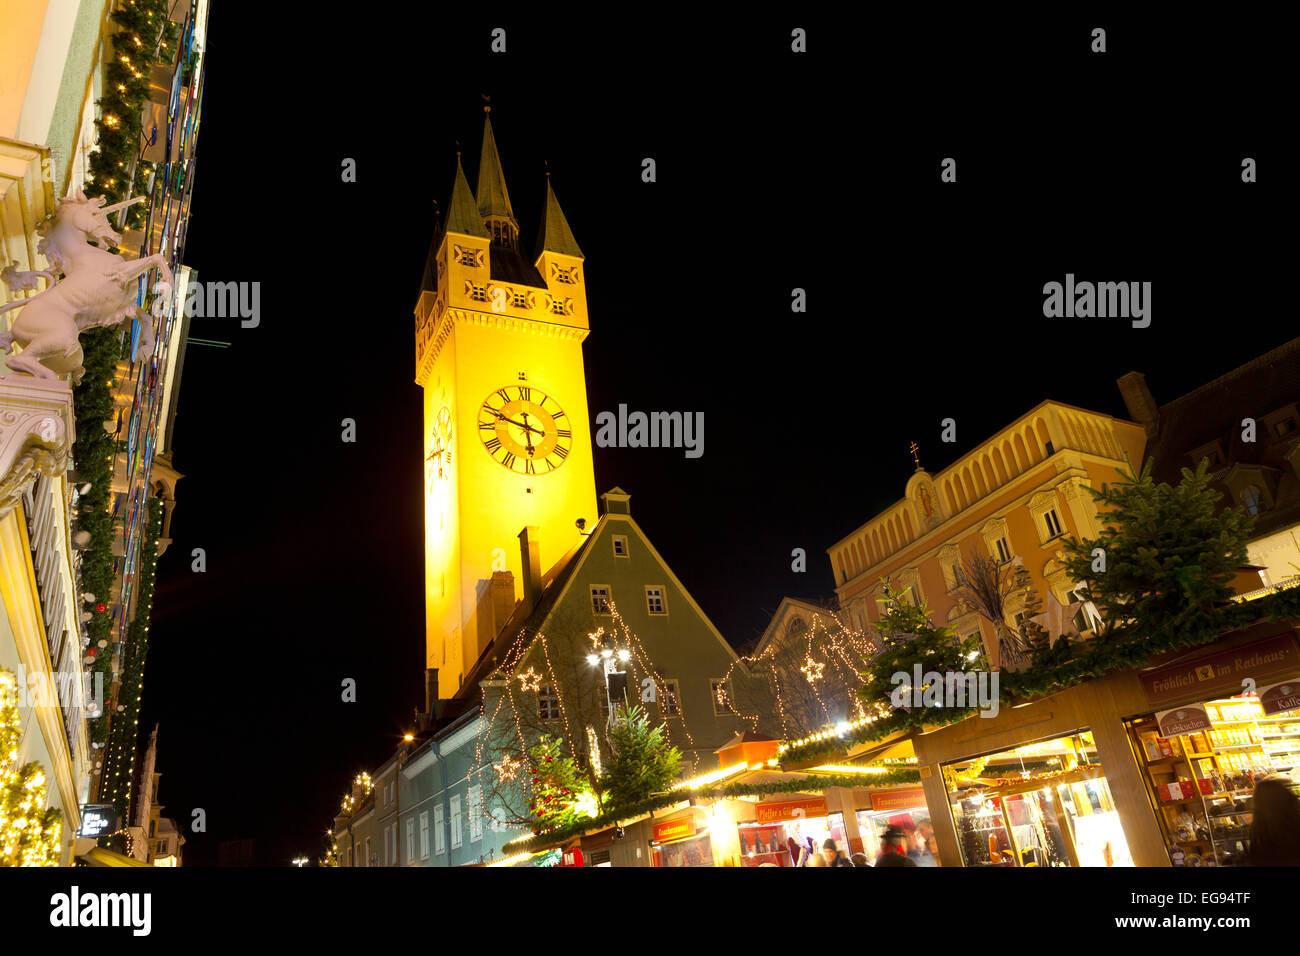 Christmas Market and Giant Advent Calender in Staubing, Bavaria, Germany Stock Photo